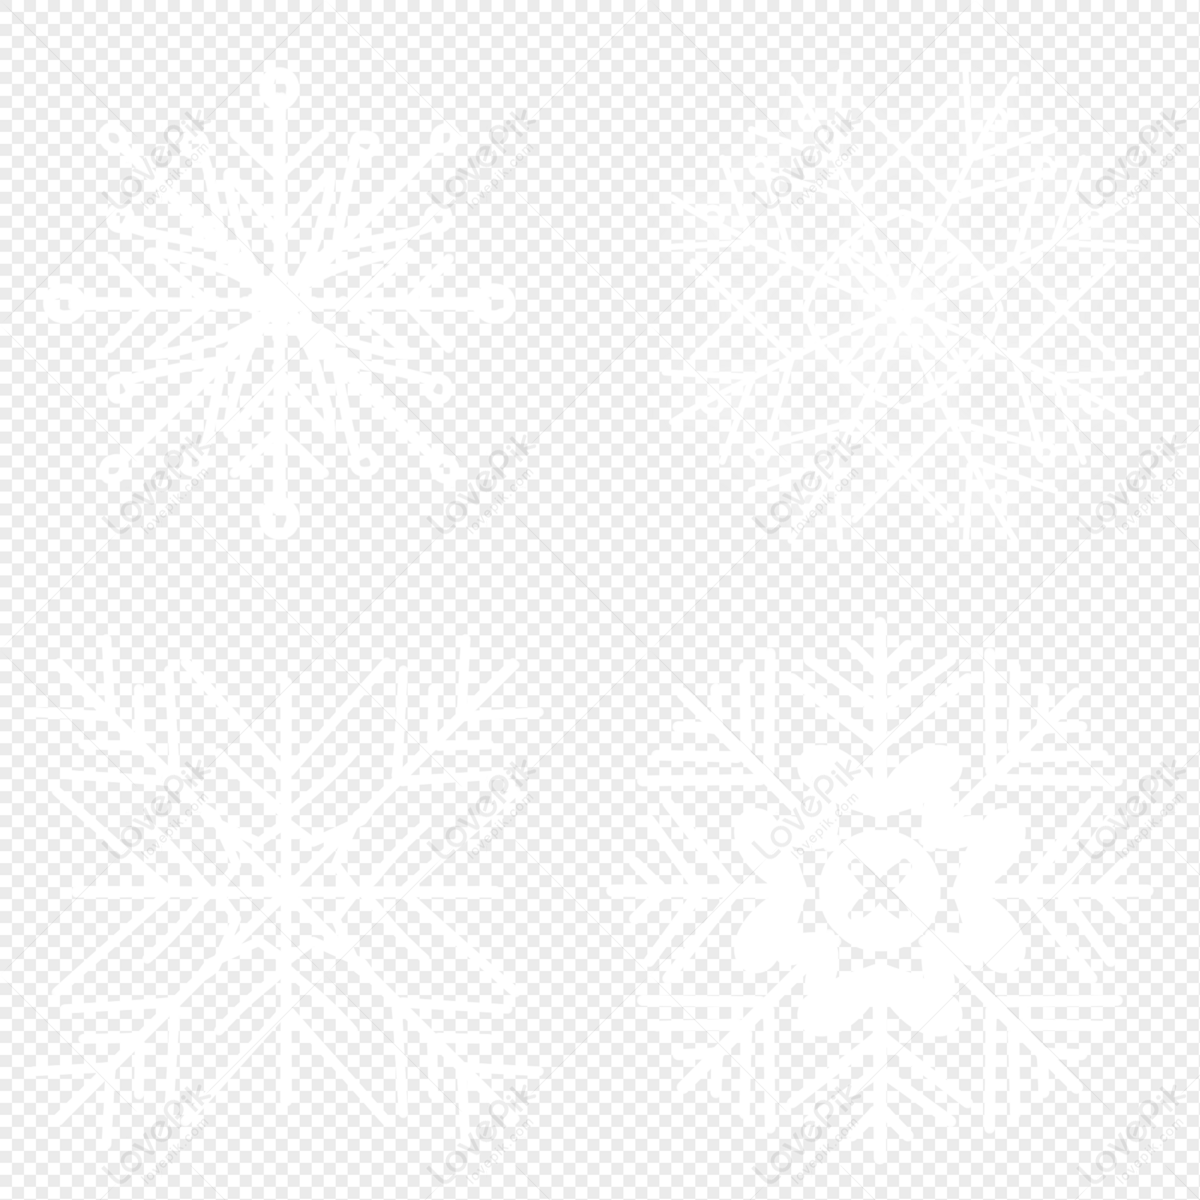 Various Snowflake Shapes PNG Transparent Background And Clipart Image For  Free Download - Lovepik | 401486210